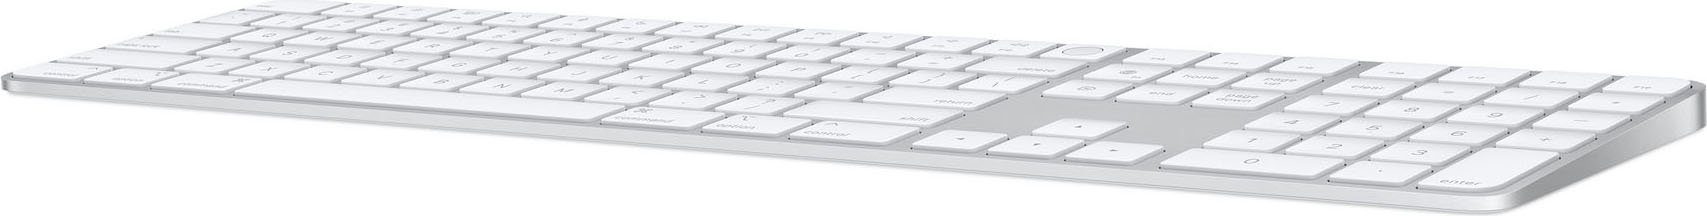 ID Keyboard Apple-Tastatur with Apple Touch Mac Numeric for Keypad and Magic